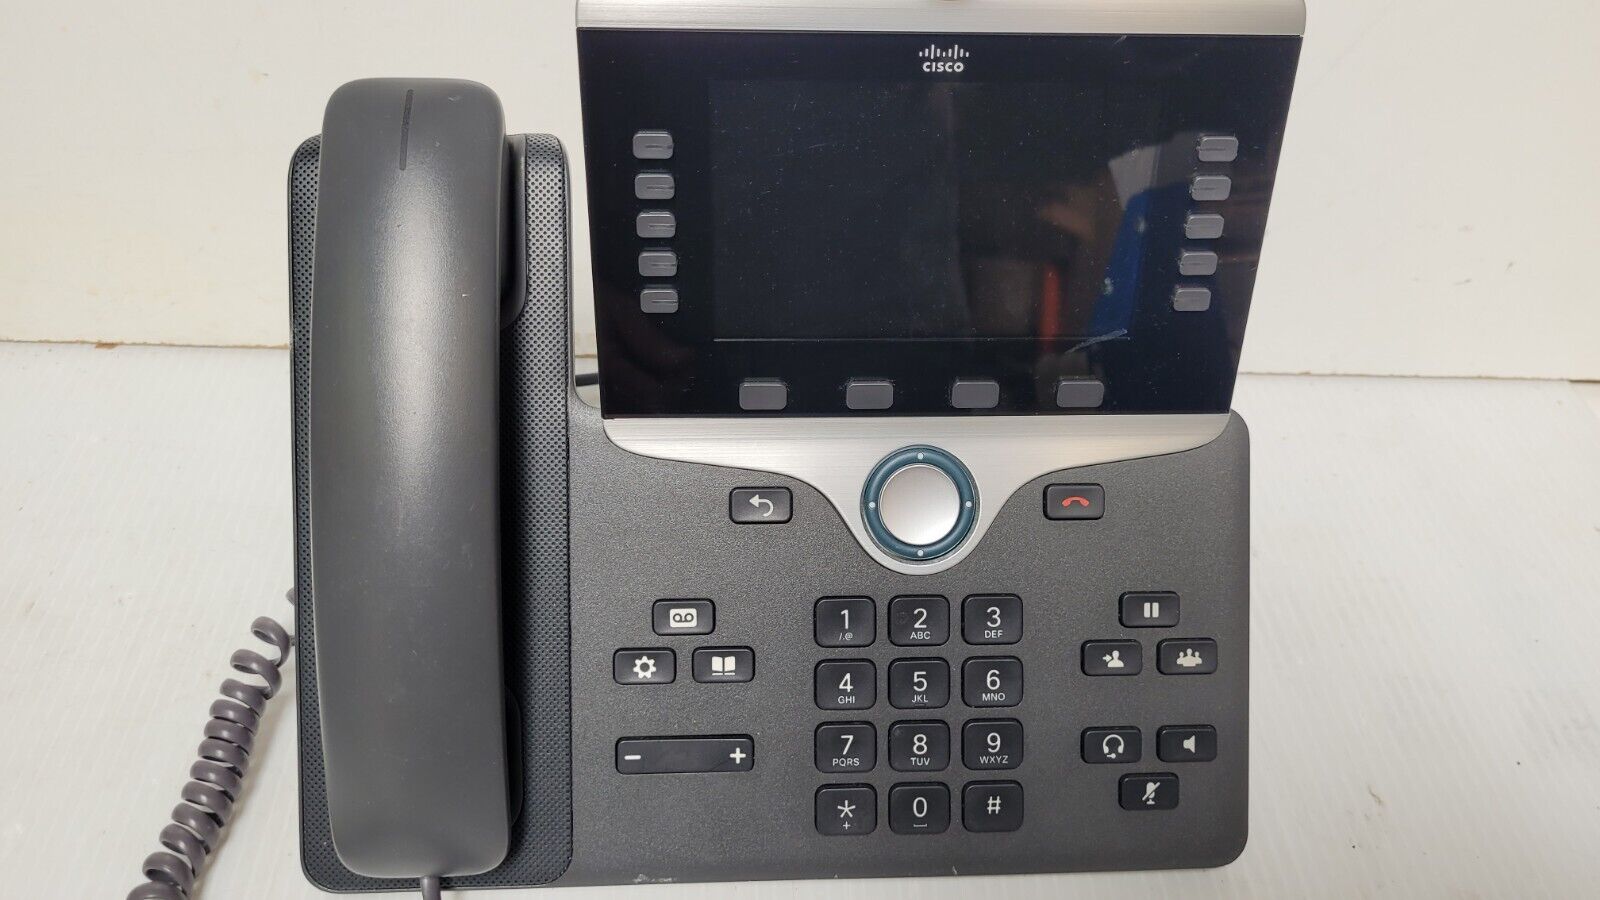 Cisco CP-8865-K9 VoIP Video Conference Phone w/ Handset Stand And Camera